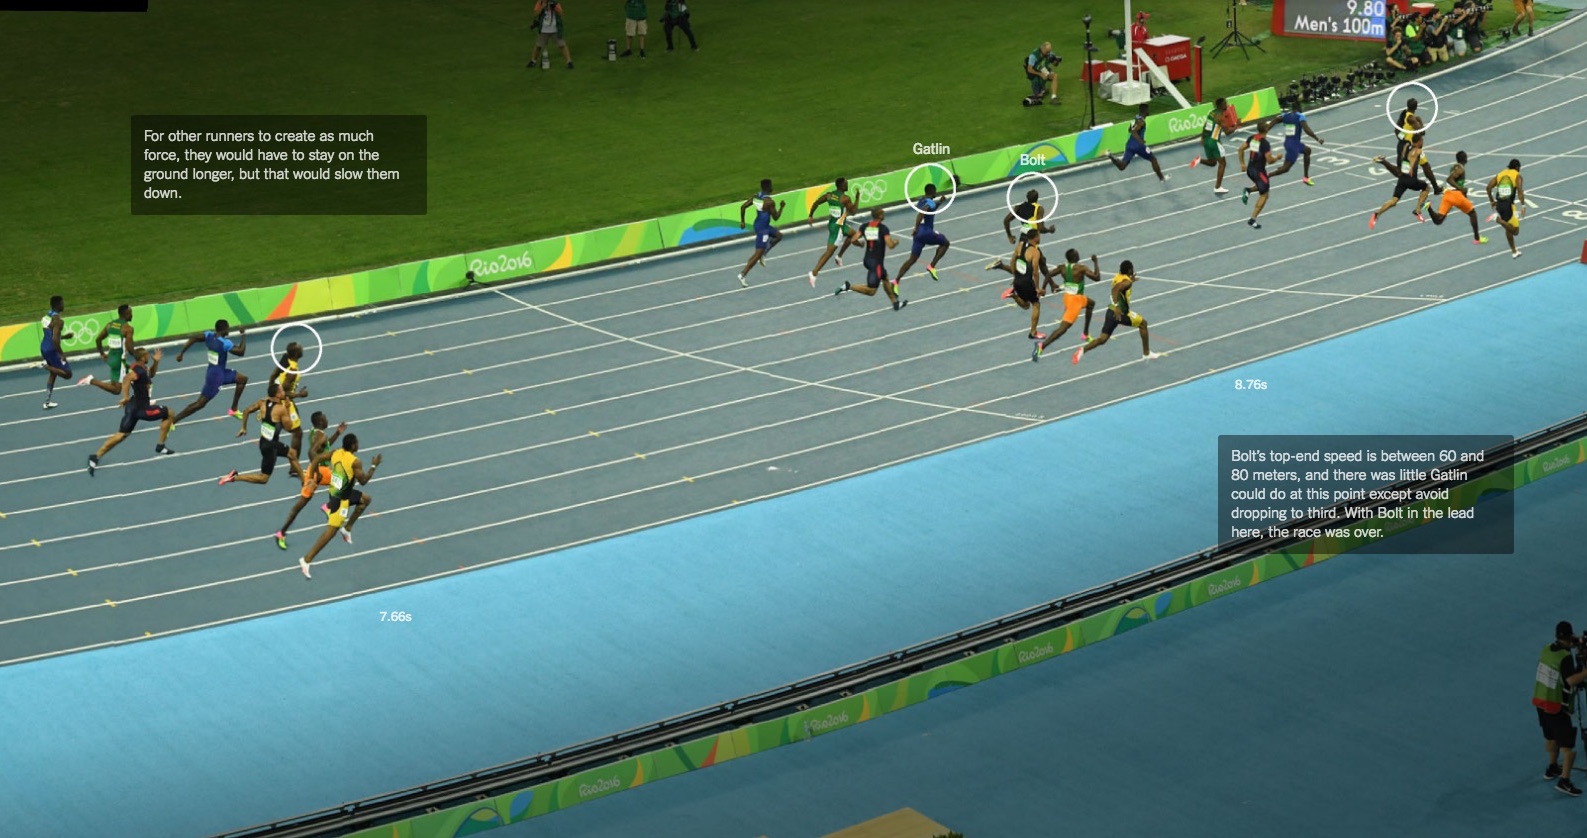 How Usain Bolt Came From Behind Again to Win Gold